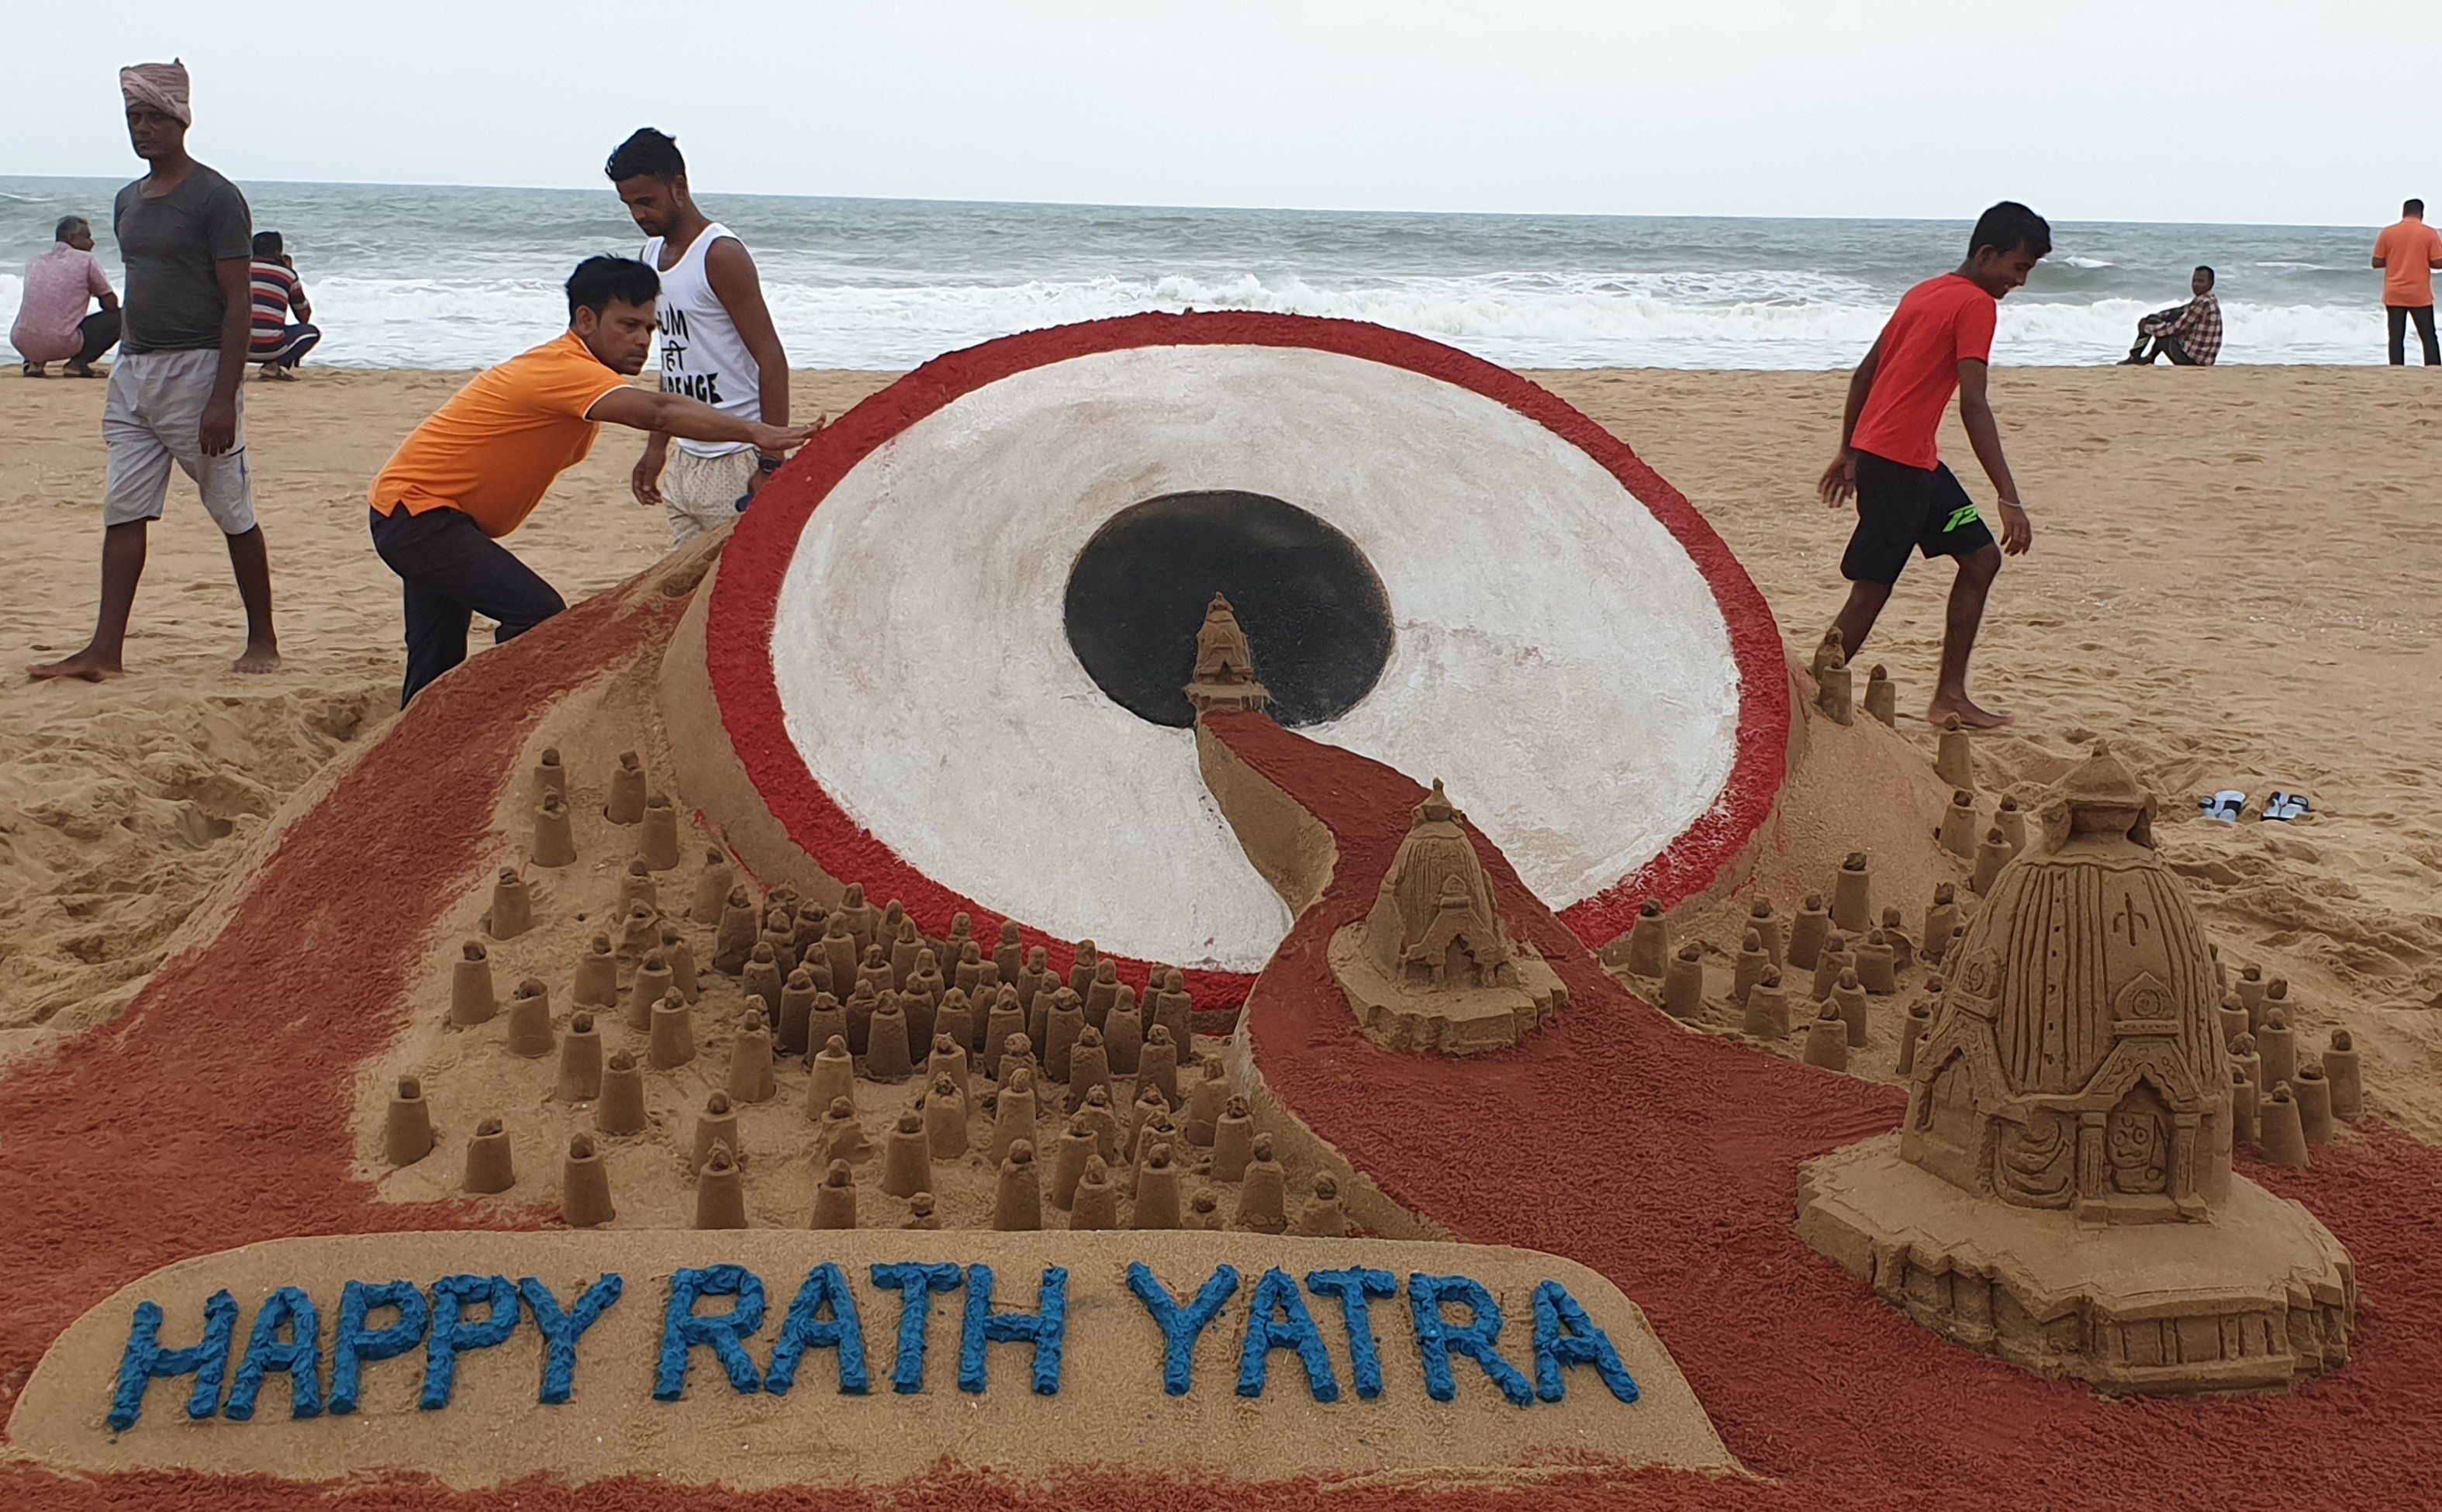 In the divine land of Puri, famous sand artist Manas Kumar Sahoo has created chariot made of sand.